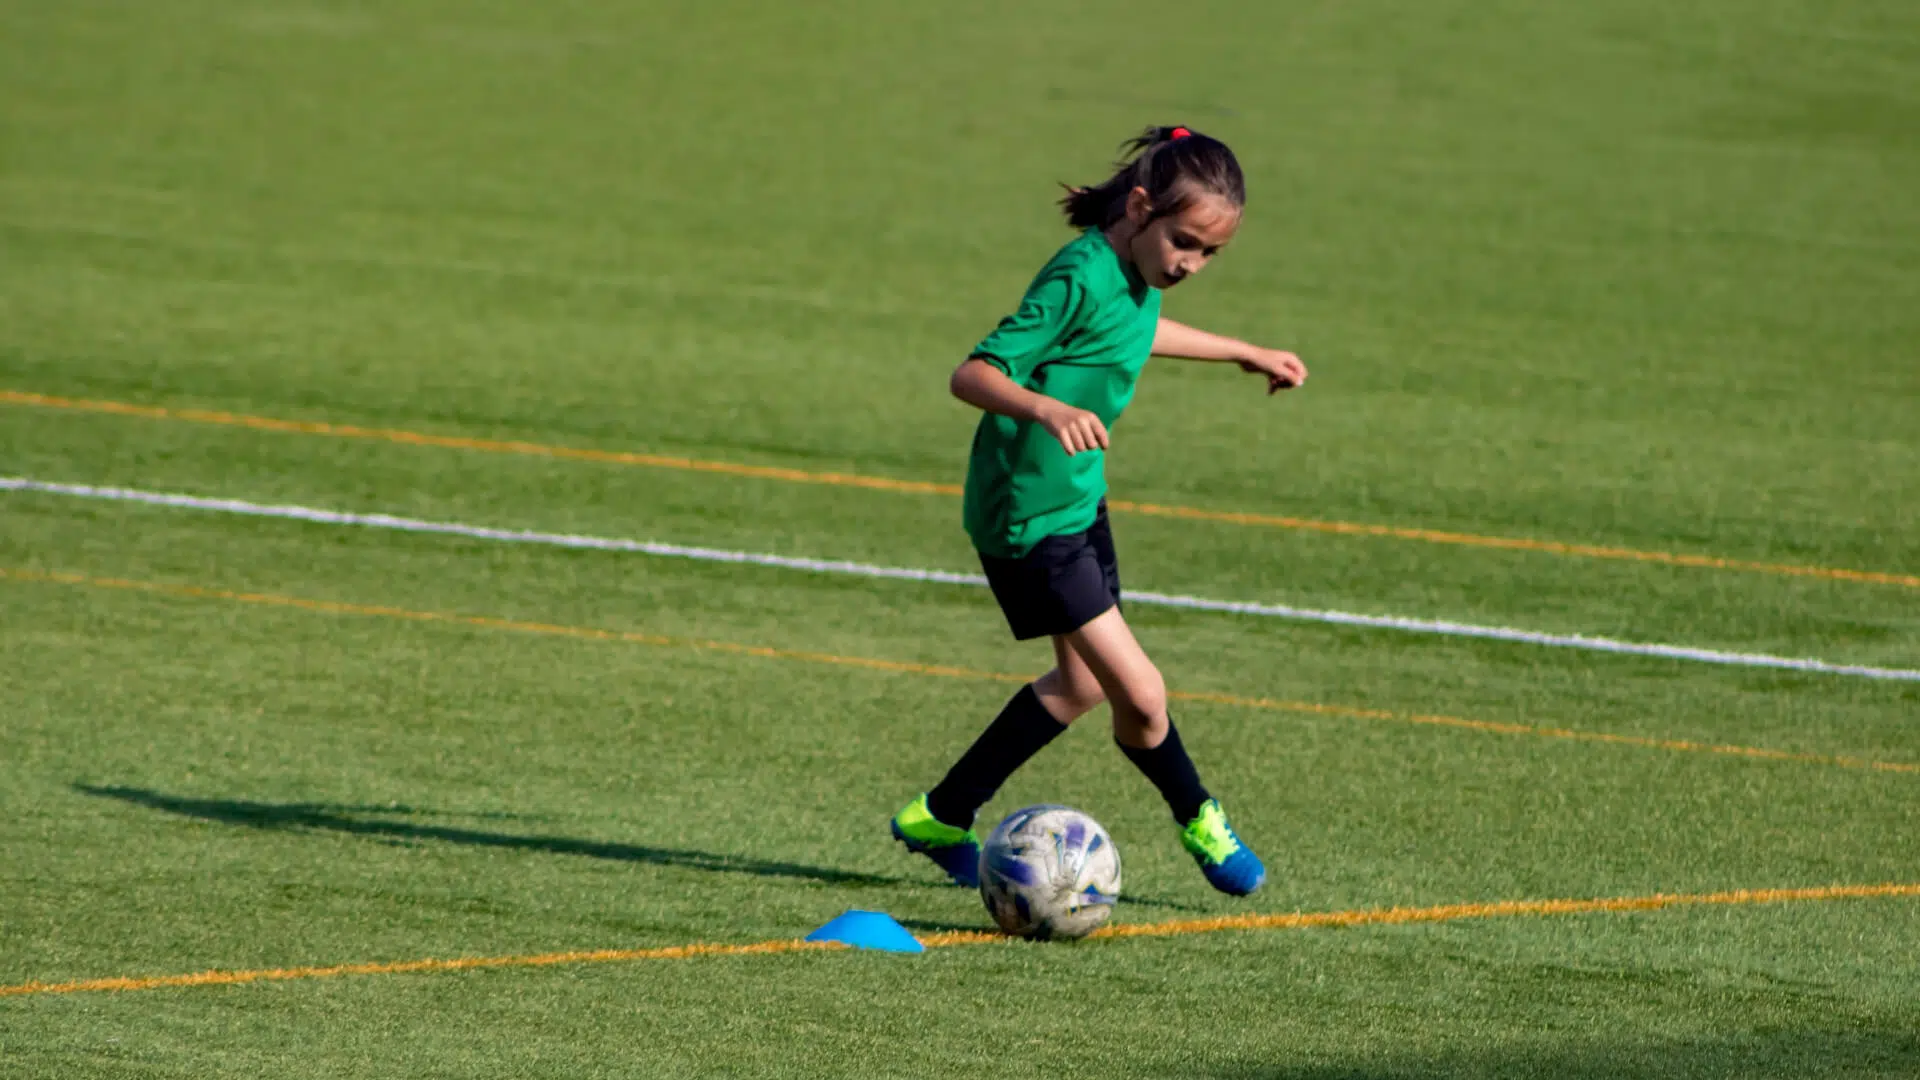 club soccer tryout tips: girl playing soccer